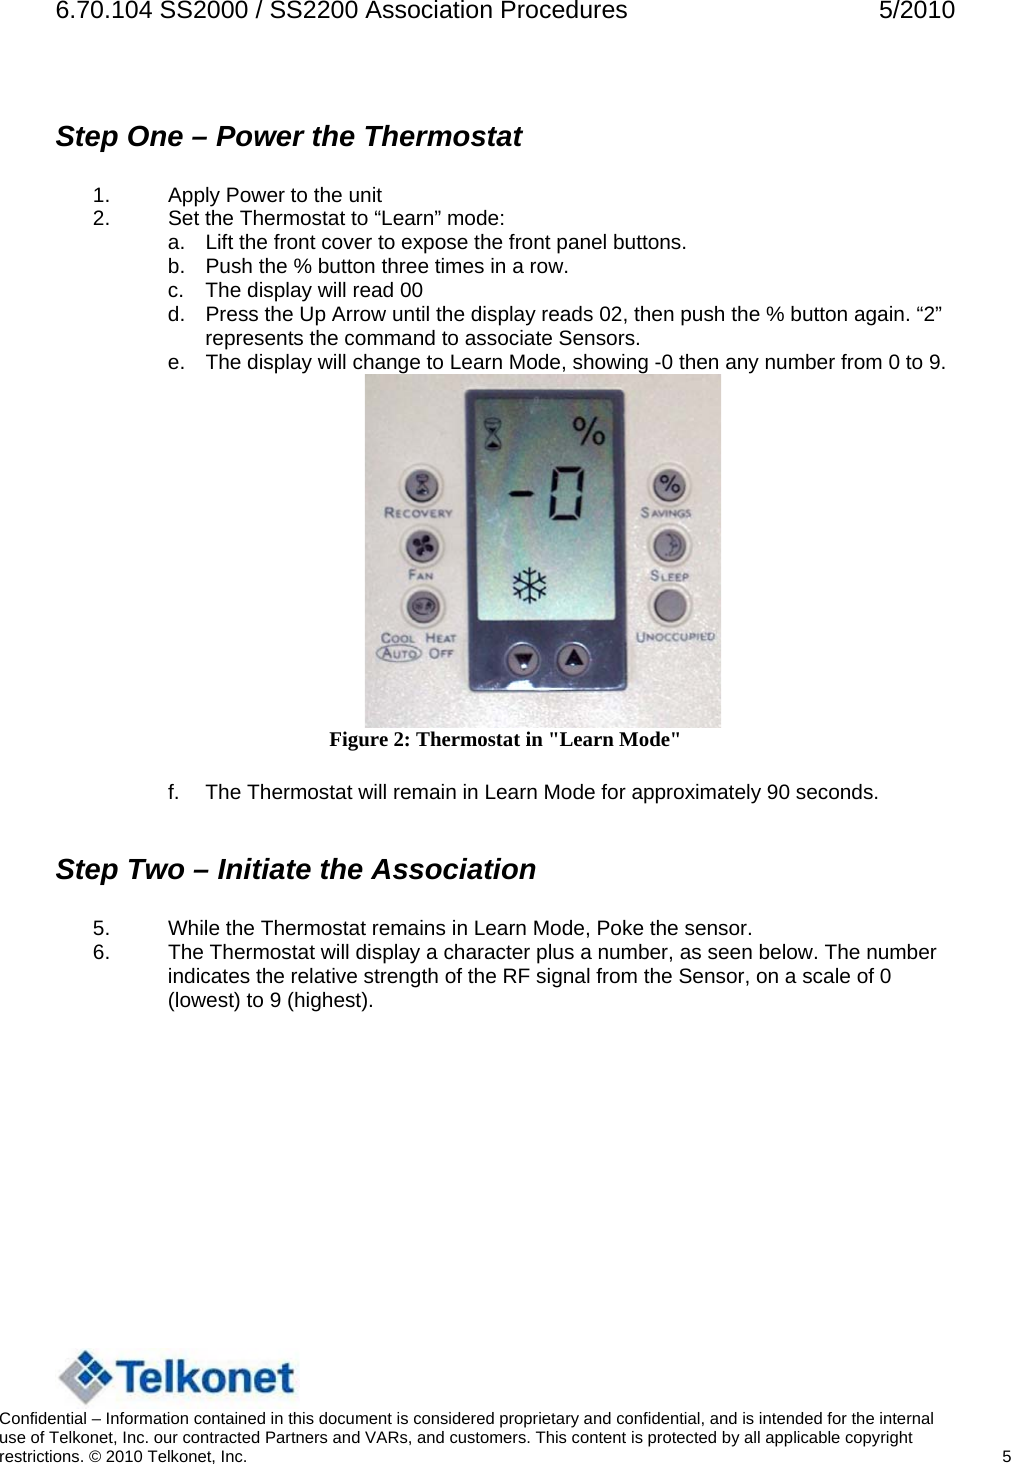 6.70.104 SS2000 / SS2200 Association Procedures  5/2010  Step One – Power the Thermostat  1.  Apply Power to the unit 2.  Set the Thermostat to “Learn” mode: a.  Lift the front cover to expose the front panel buttons. b.  Push the % button three times in a row. c.  The display will read 00 d.  Press the Up Arrow until the display reads 02, then push the % button again. “2” represents the command to associate Sensors. e.  The display will change to Learn Mode, showing -0 then any number from 0 to 9.   Figure 2: Thermostat in &quot;Learn Mode&quot;  f.  The Thermostat will remain in Learn Mode for approximately 90 seconds.  Step Two – Initiate the Association  5.  While the Thermostat remains in Learn Mode, Poke the sensor. 6.  The Thermostat will display a character plus a number, as seen below. The number indicates the relative strength of the RF signal from the Sensor, on a scale of 0 (lowest) to 9 (highest).   Confidential – Information contained in this document is considered proprietary and confidential, and is intended for the internal use of Telkonet, Inc. our contracted Partners and VARs, and customers. This content is protected by all applicable copyright restrictions. © 2010 Telkonet, Inc.    5  